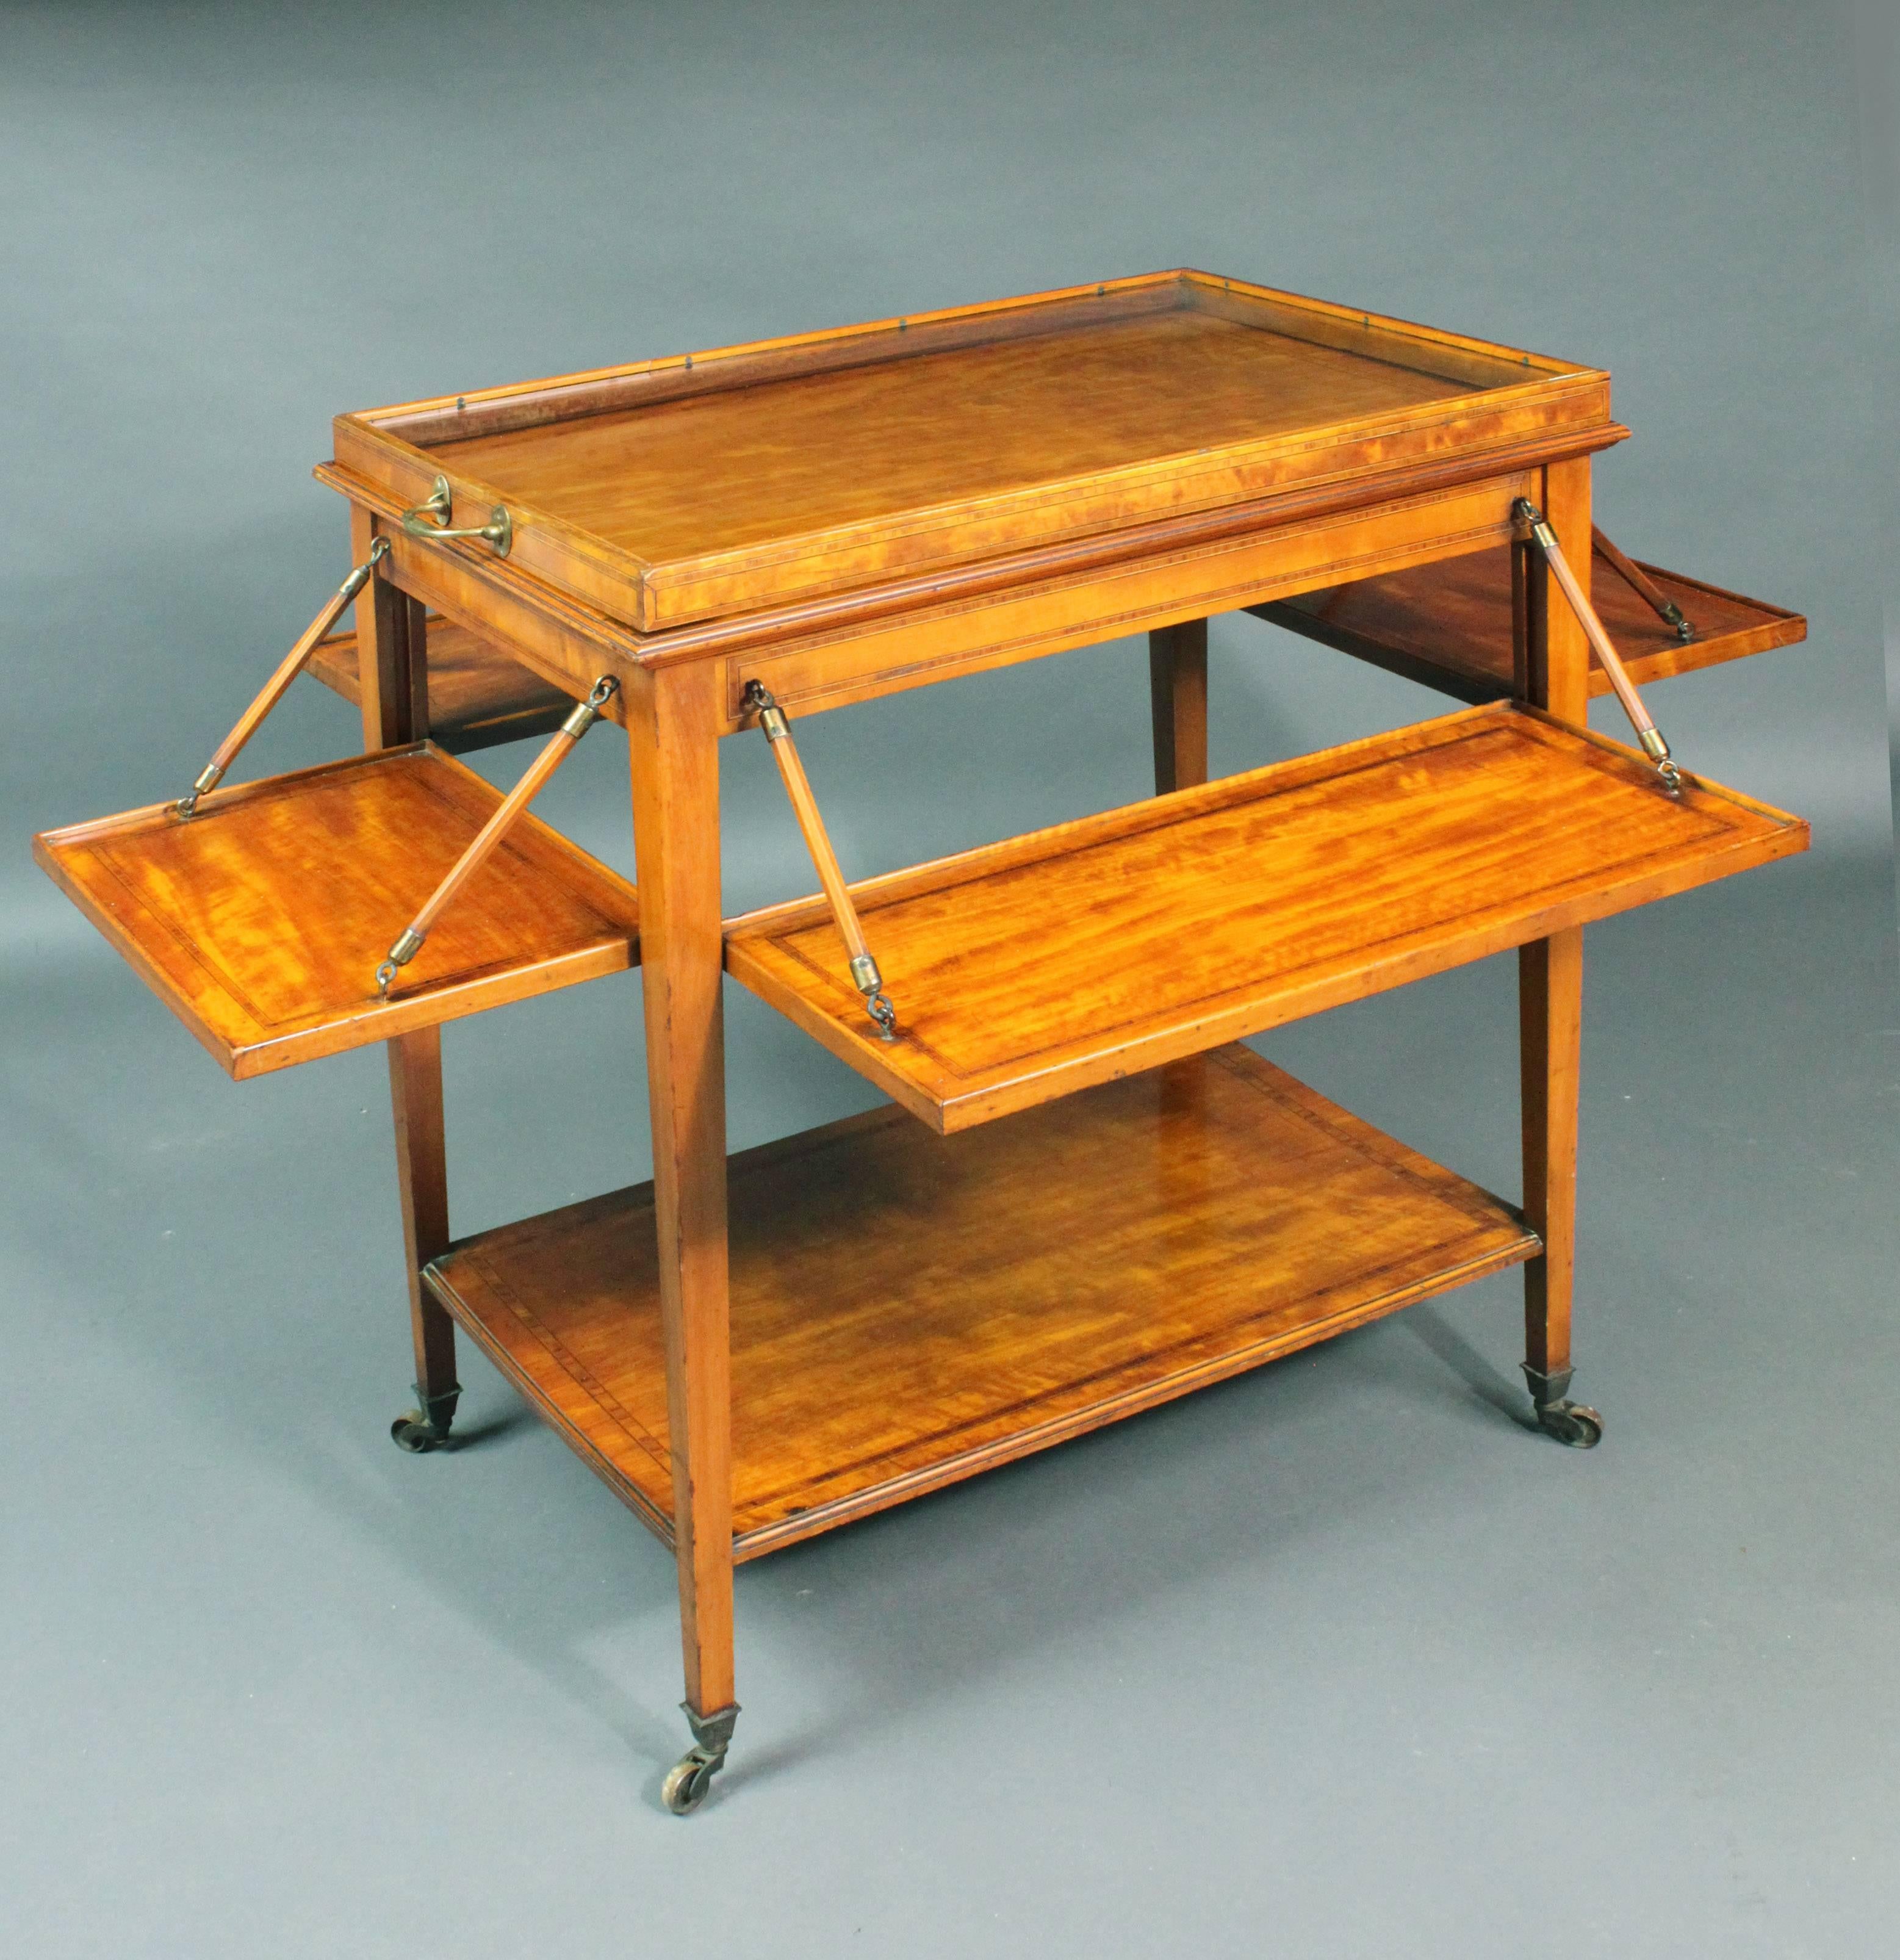 An exceptional tea trolley in satinwood of a good color and patina; a tray flaps out on each side to hold sandwiches and cakes and there is a removable glass bottomed tray on the top.

Width when trays opened out 39